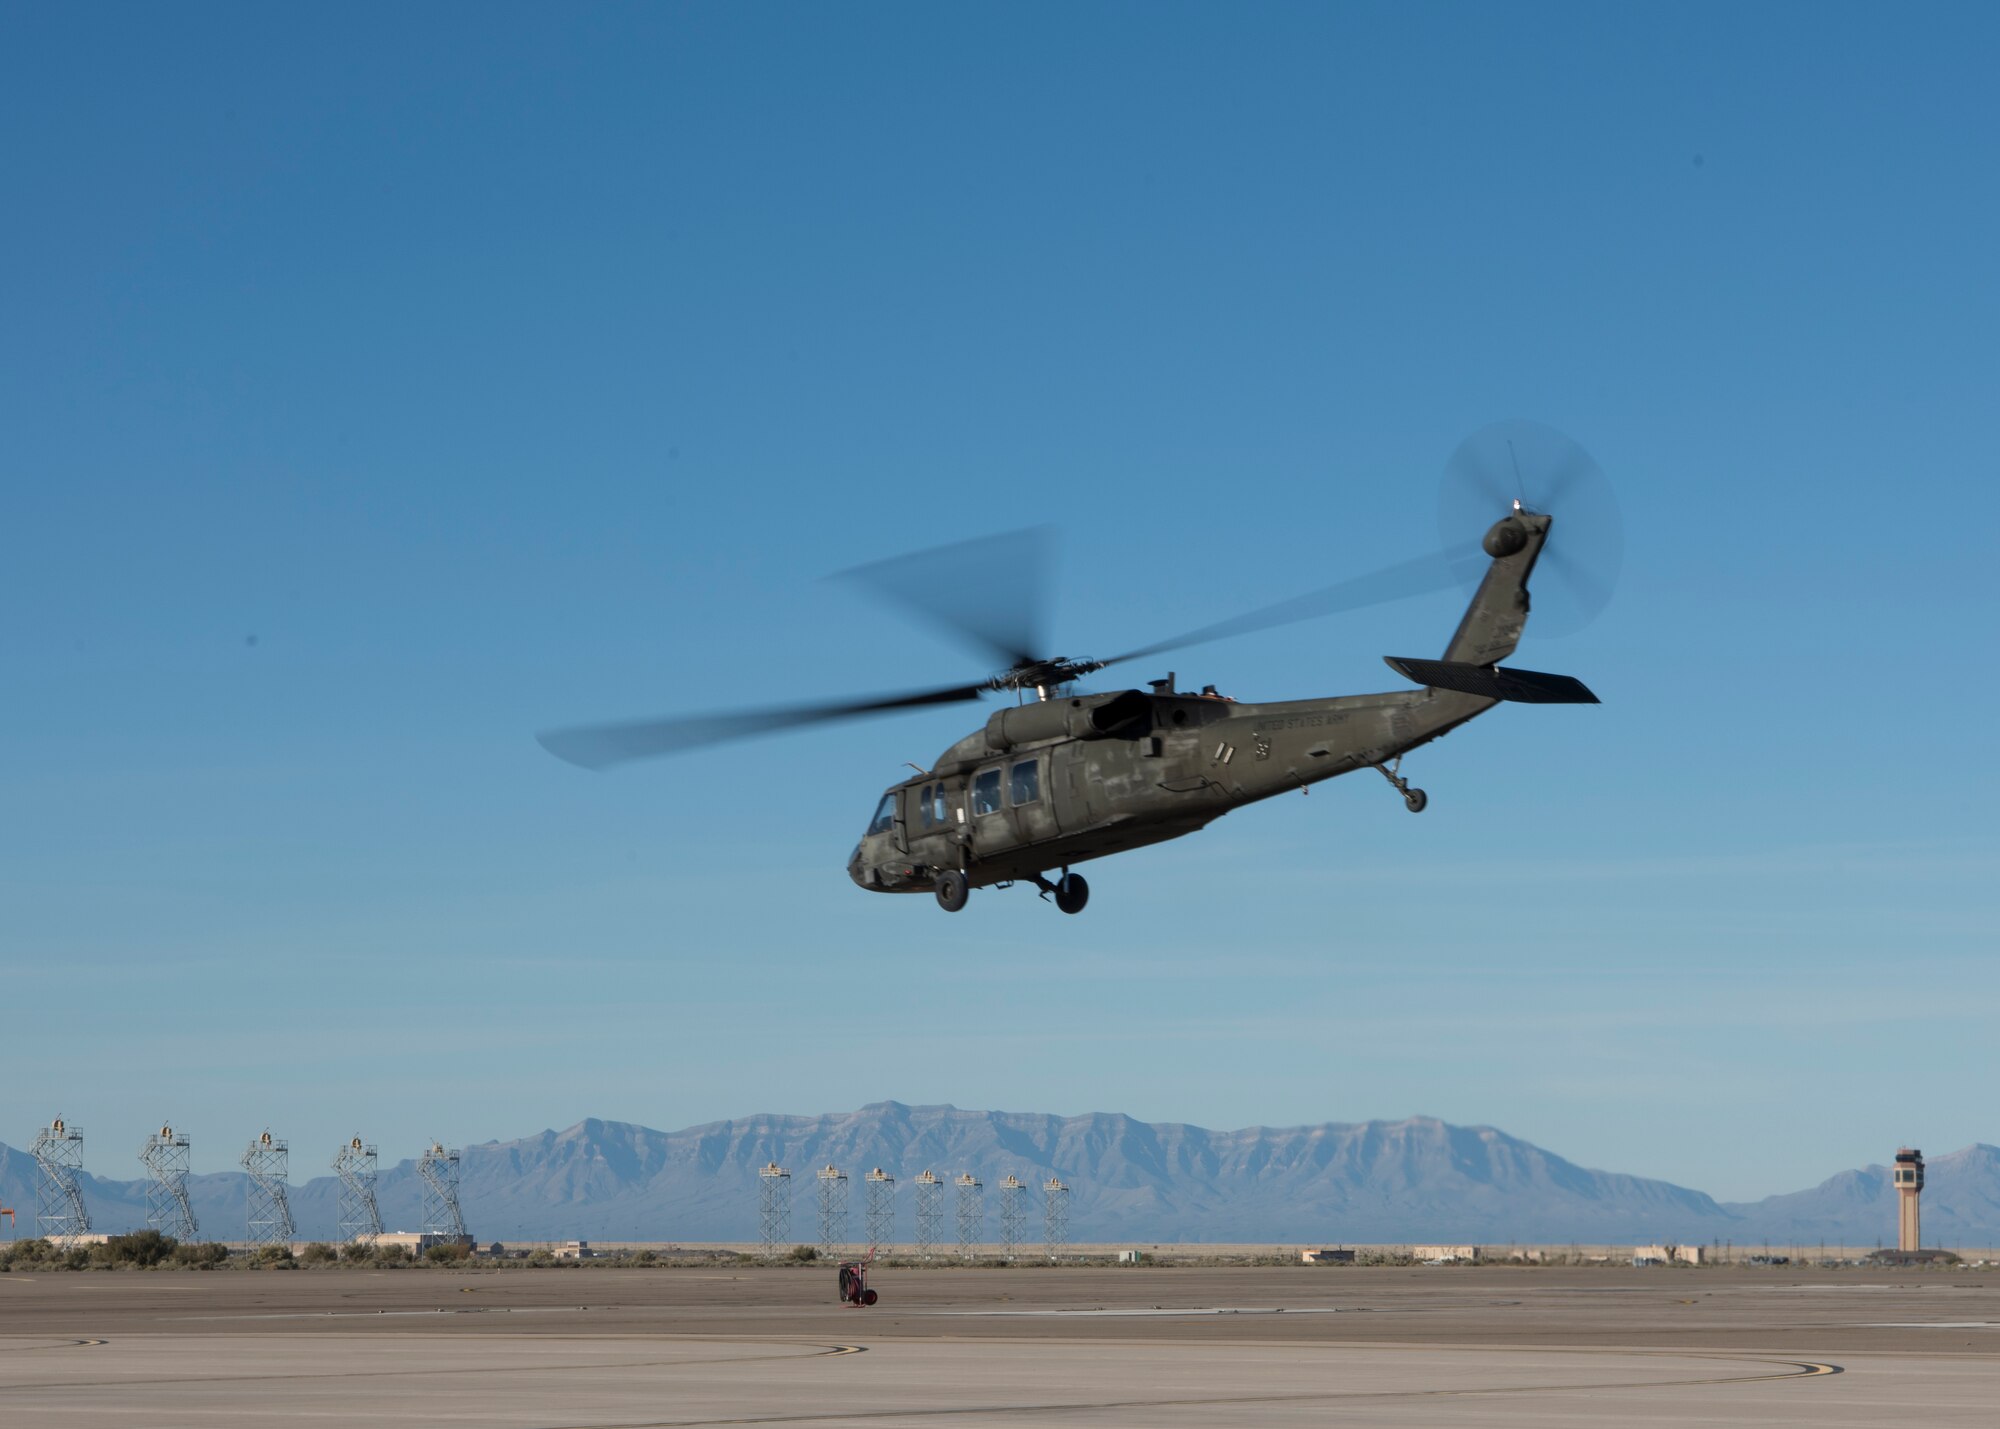 A UH-60 Black Hawk helicopter takes off of Holloman Air Force Base, N.M., November 14, 2018. Gen. Paul Selva, vice chairman of the Joint Chiefs of Staff, visited Holloman November 13 to 14, and received a helicopter tour of White Sands Missile Range, N.M. (U.S. Air Force photo by Staff Sgt. BreeAnn Sachs).